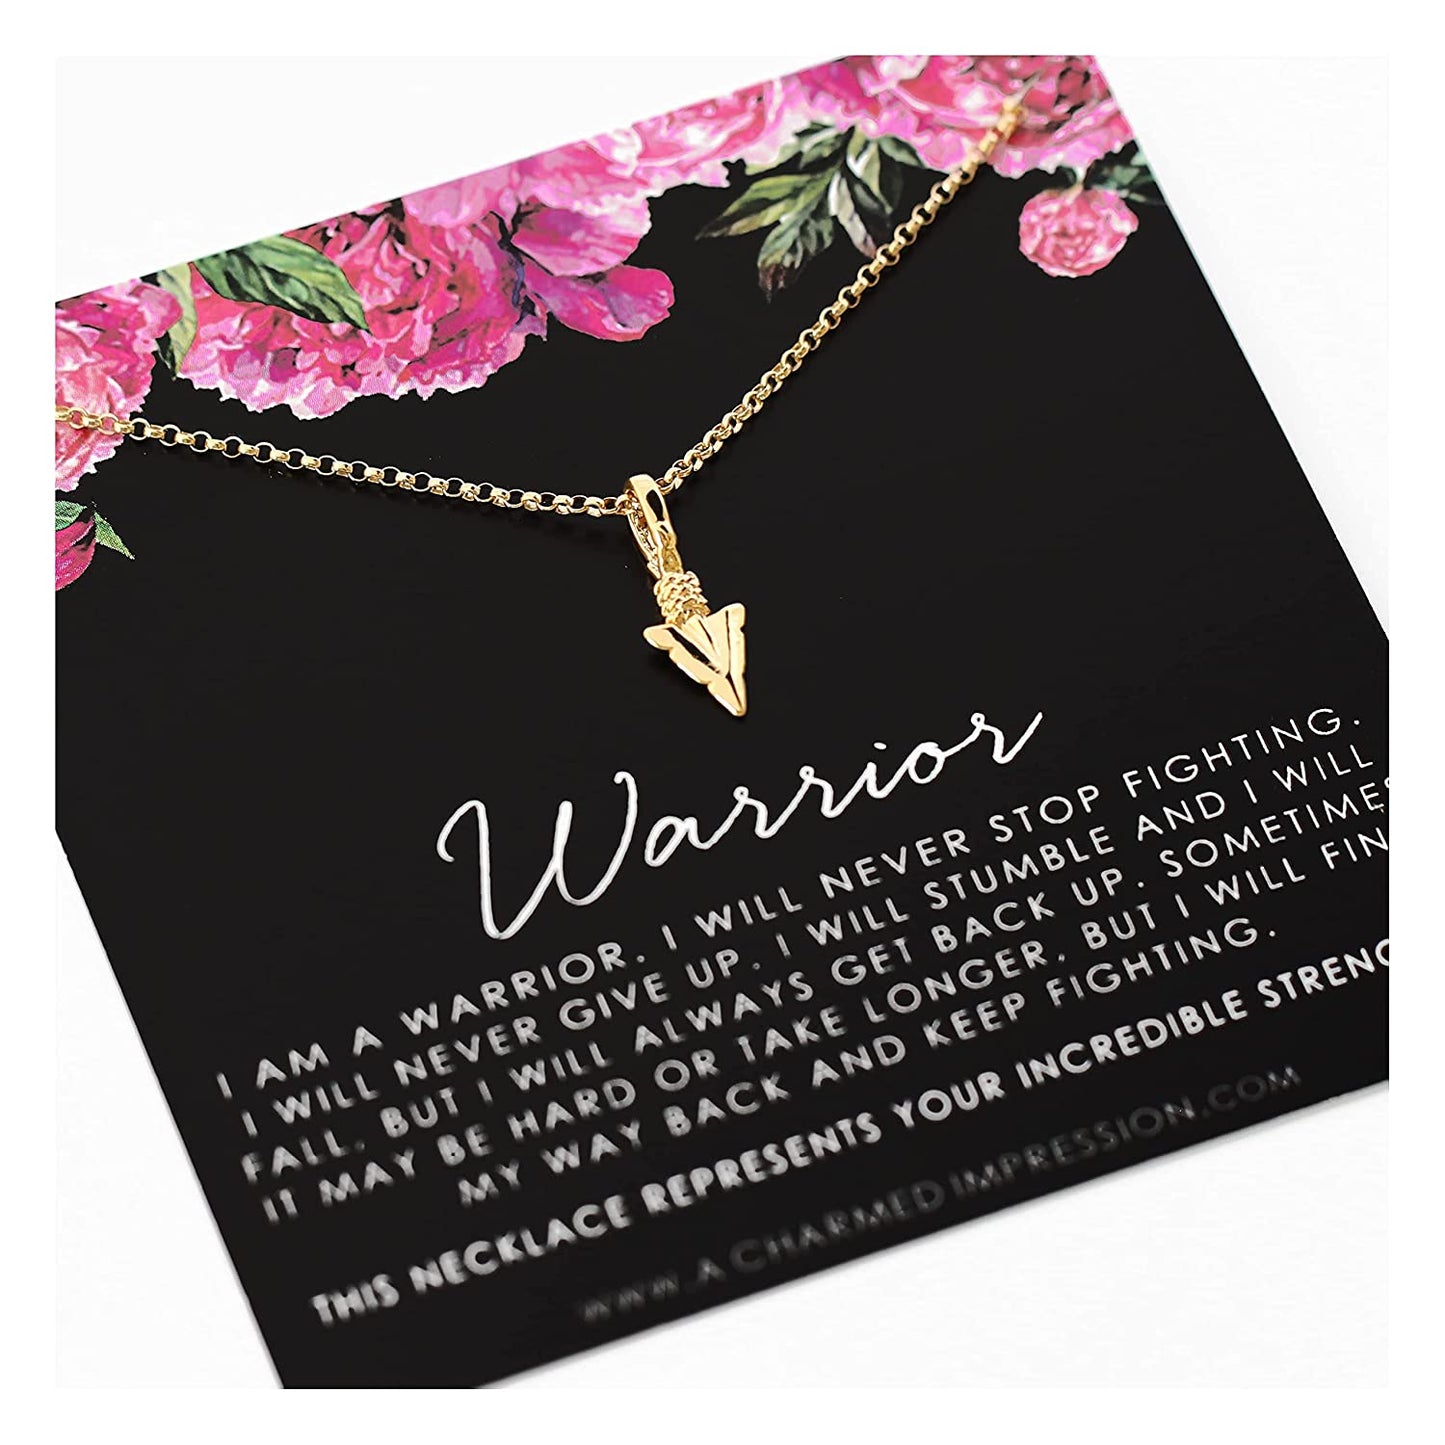 Survivor Jewelry • Warrior Necklace • Encouragement Gift for Women • Gold • Arrowhead Charm • You are Strong • You've Got This • Strength and Courage • Never Stop Fighting • Affirmation Mantra